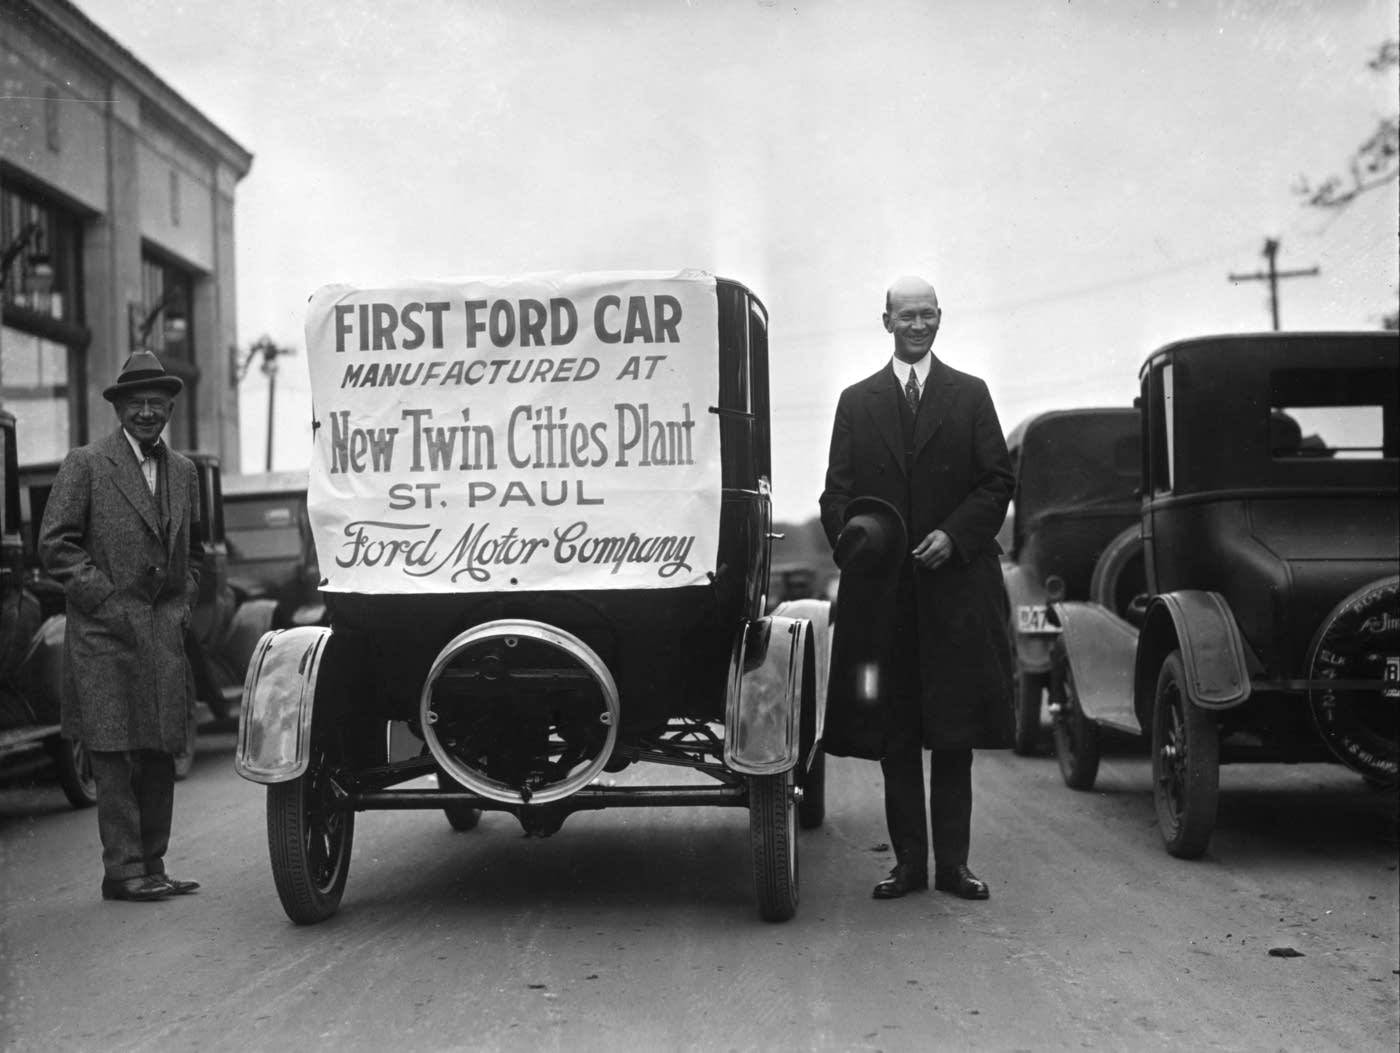 Historic image first Ford car made at the Ford Plant in St. Paul, MN